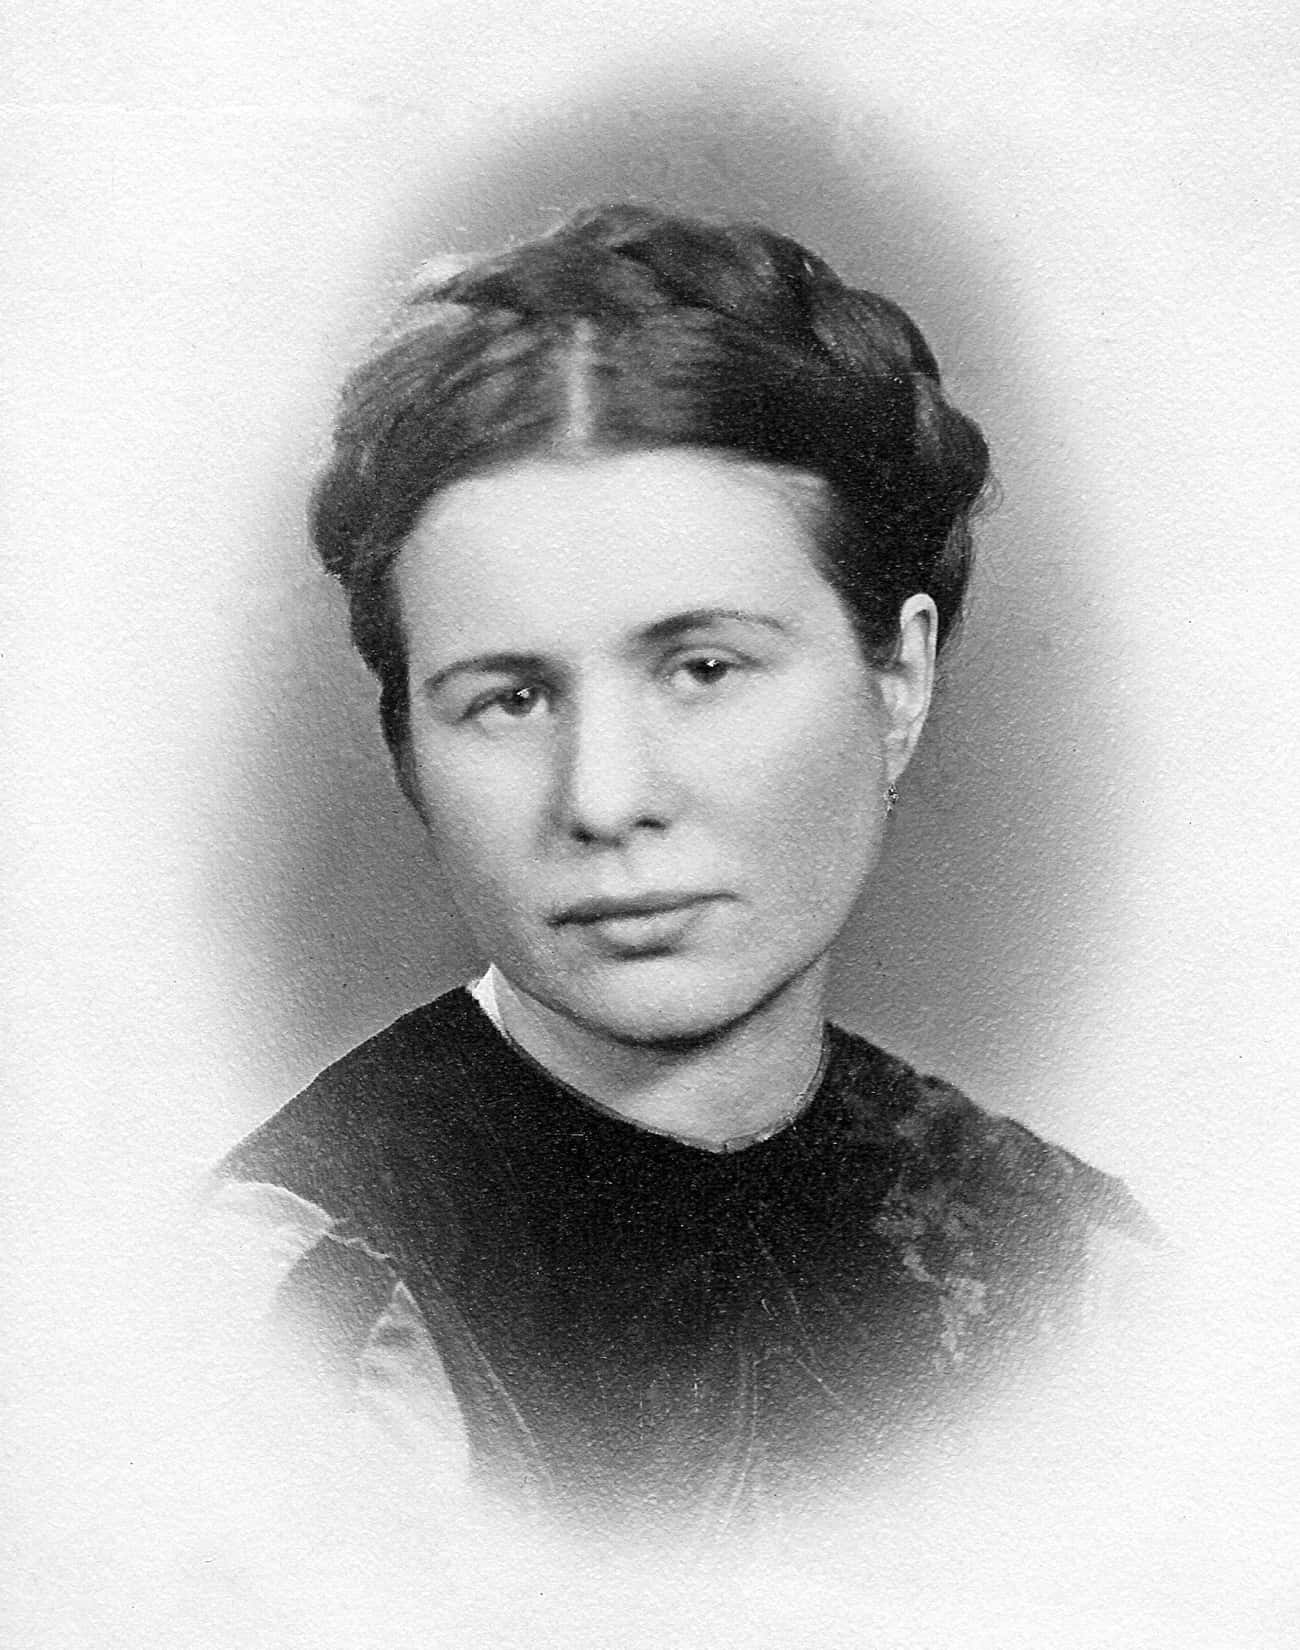 Social Worker Irena Sendler Transported Children Out Of The Warsaw Ghetto And Gave Them New Identities